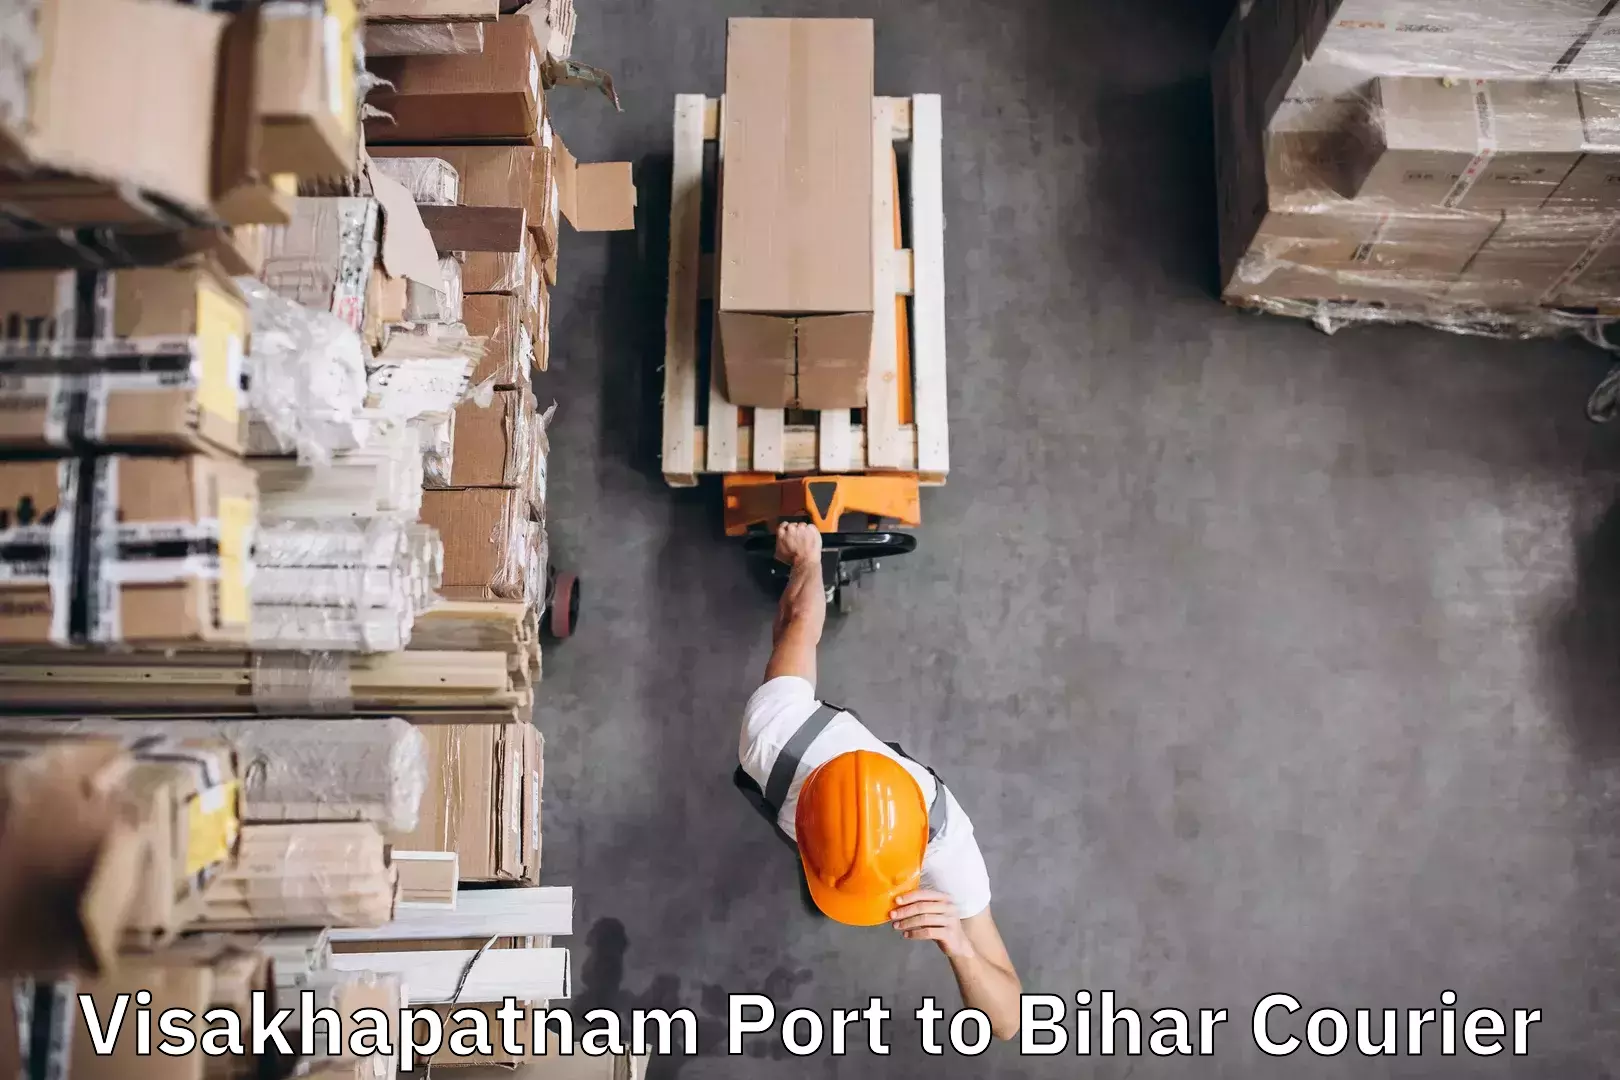 Luggage delivery network Visakhapatnam Port to Jamui